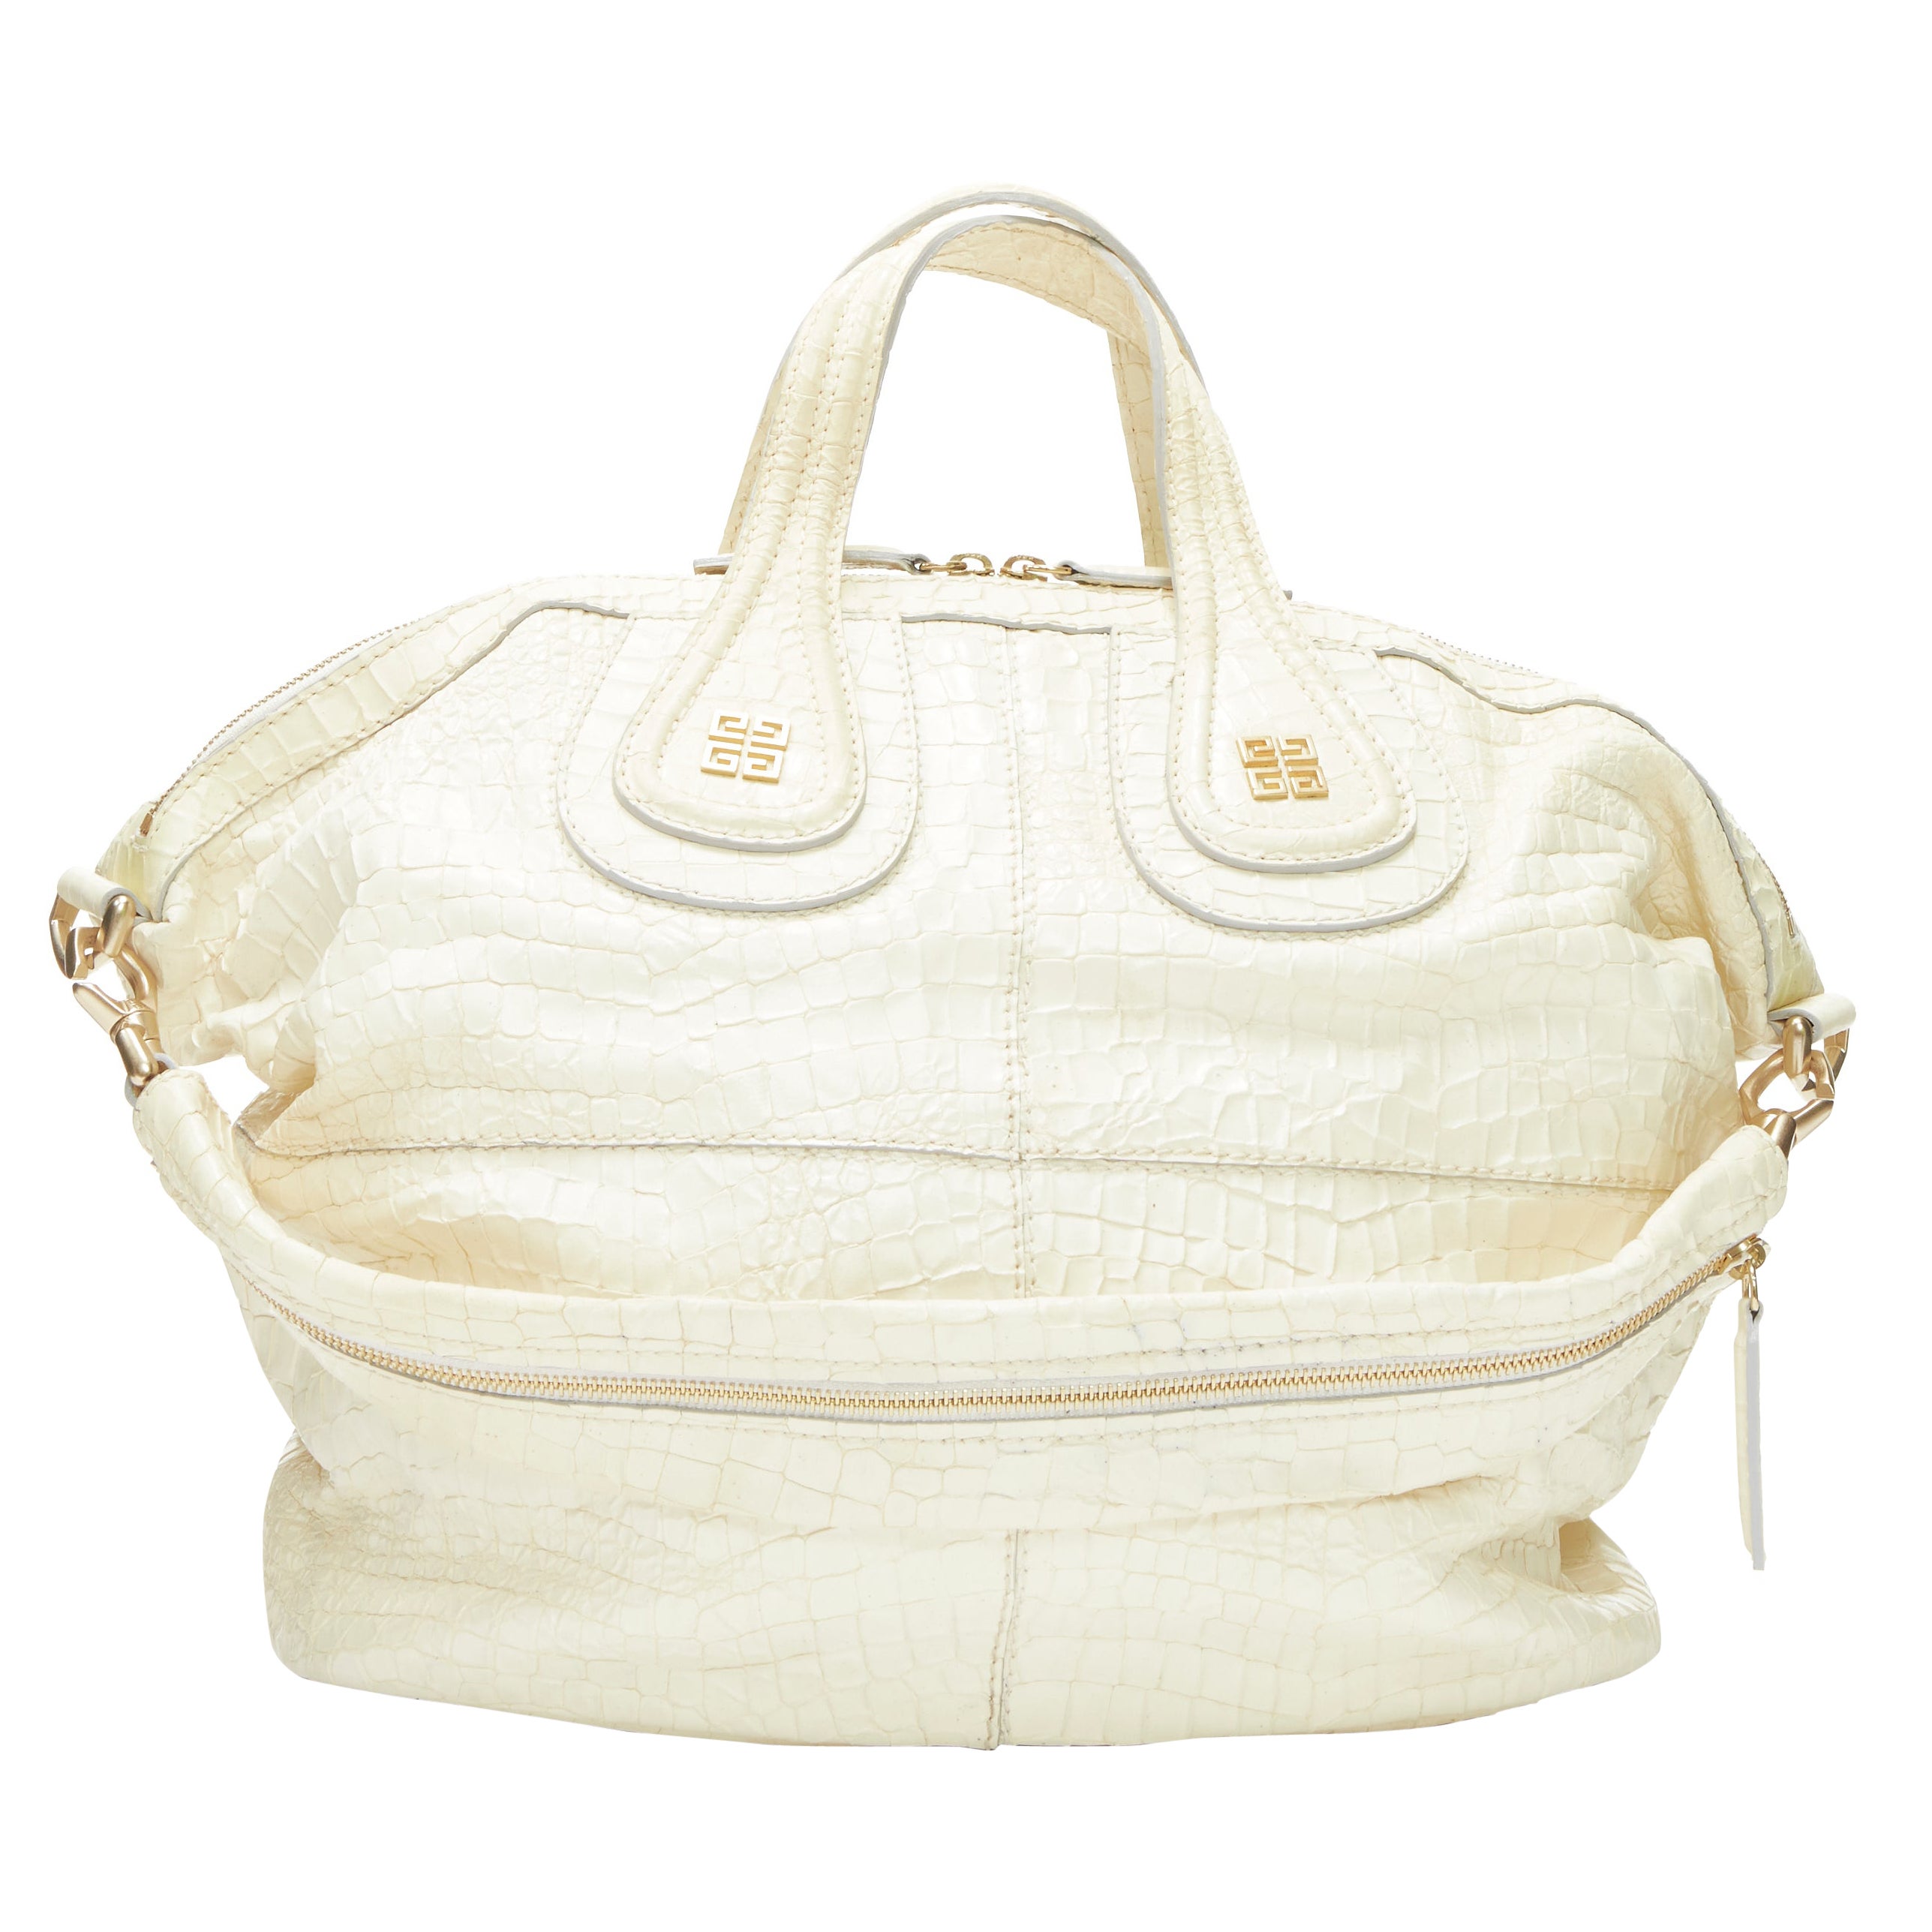 GIVENCHY Nightingale cream white embossed leather shoulder hobo tote bag